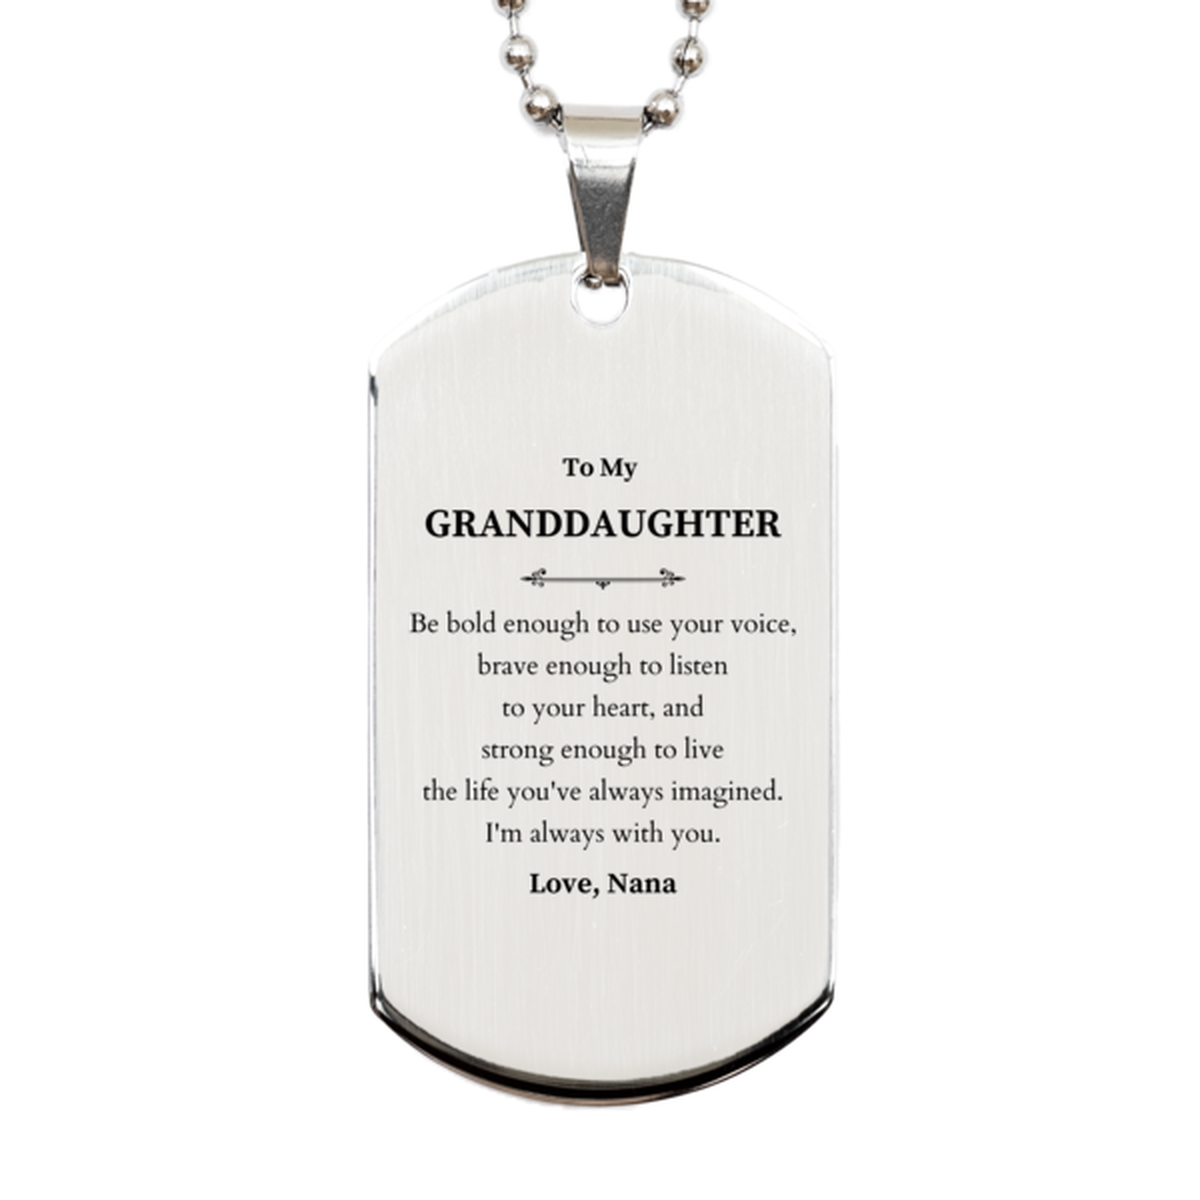 Keepsake Granddaughter Silver Dog Tag Gift Idea Graduation Christmas Birthday Granddaughter from Nana, Granddaughter Be bold enough to use your voice, brave enough to listen to your heart. Love, Nana